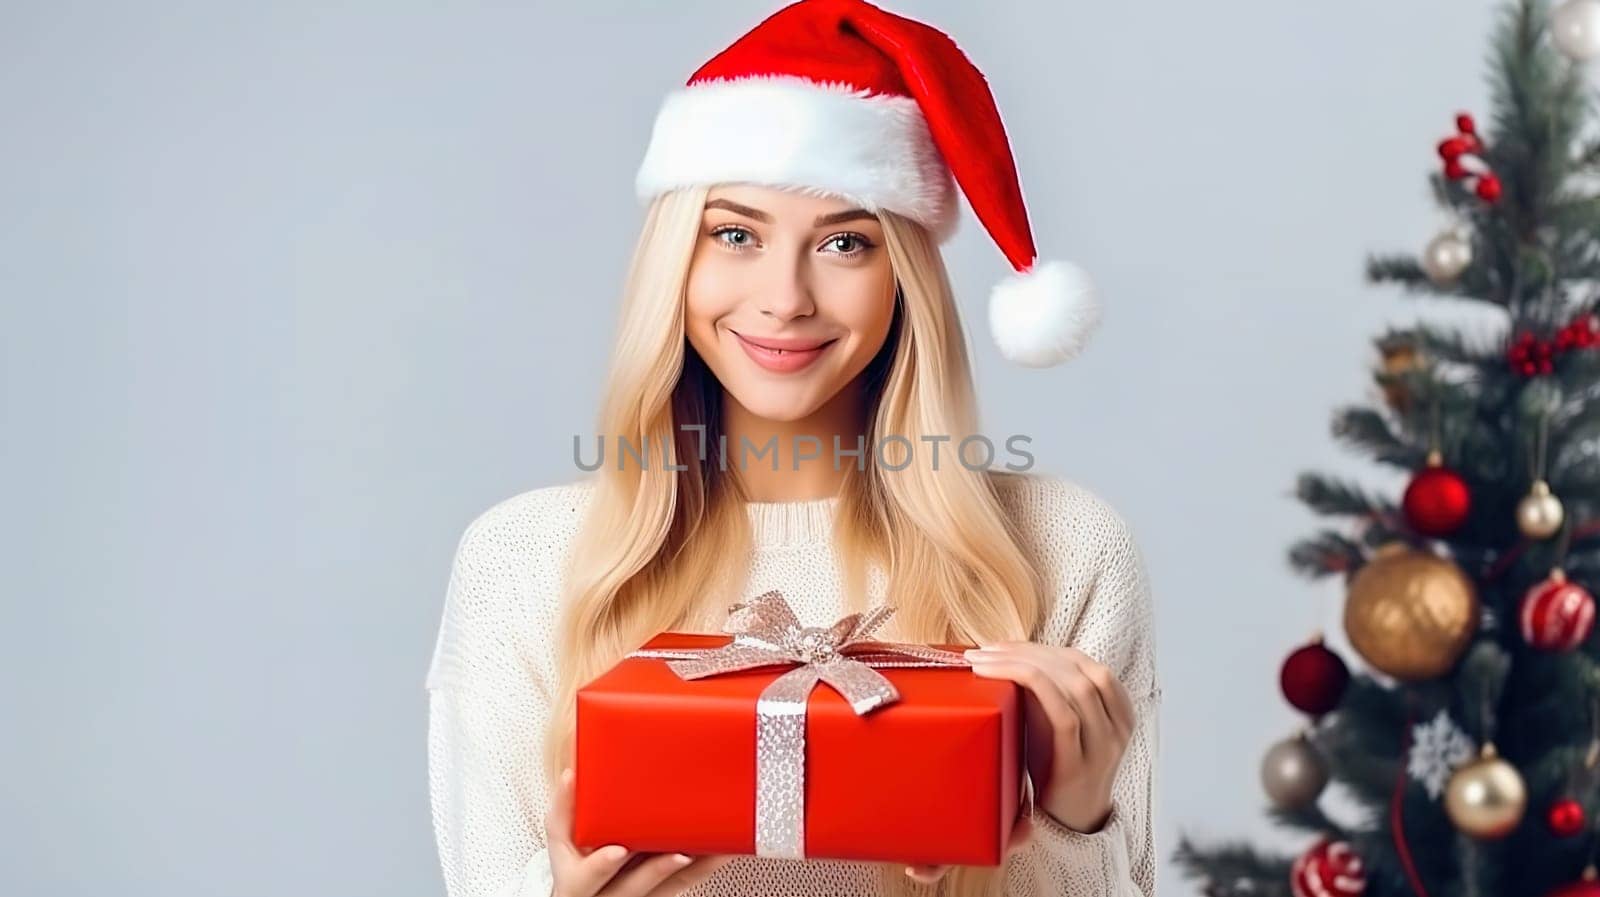 A beautiful girl in a red Christmas hat gives a gift. by Yurich32